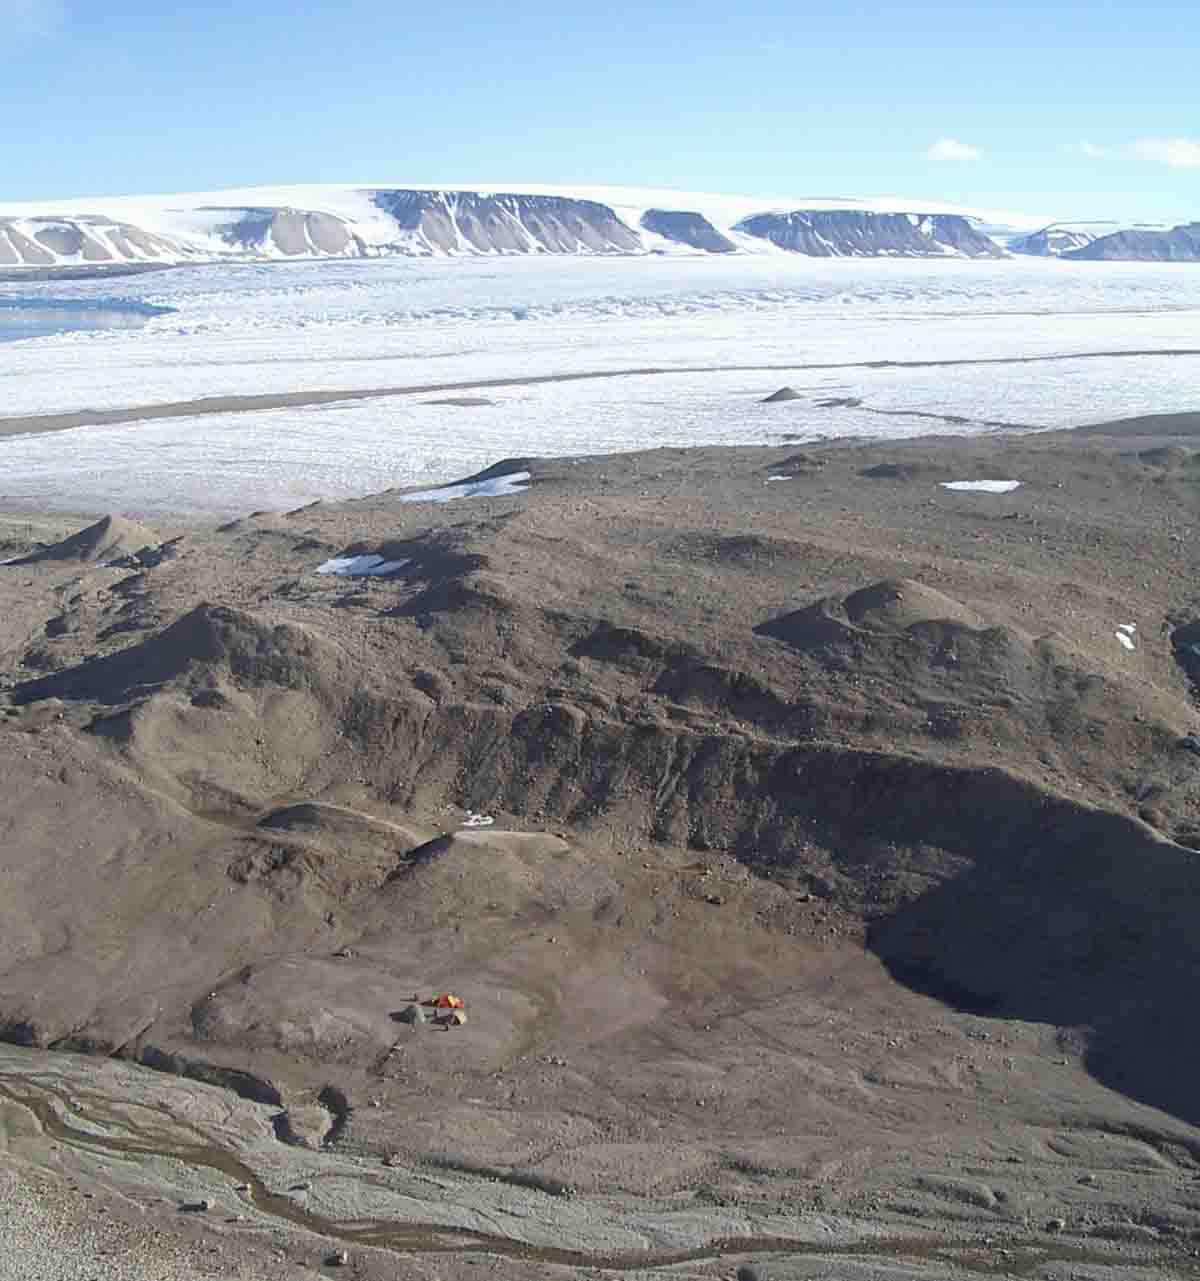 View of geologist side camp